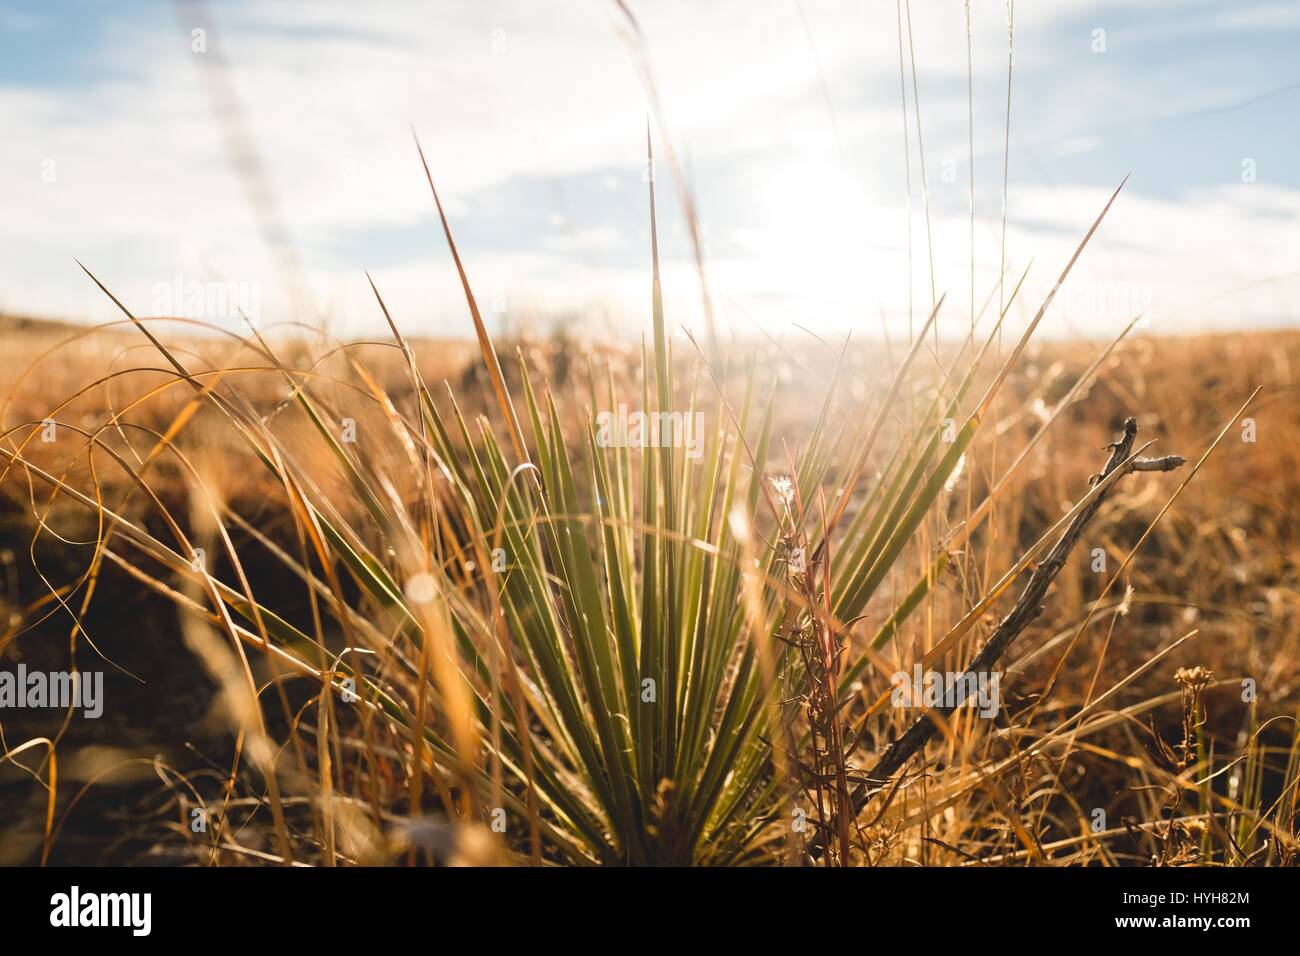 Warm golden light breaks though the cloud to highlight a plant in an open field Stock Photo